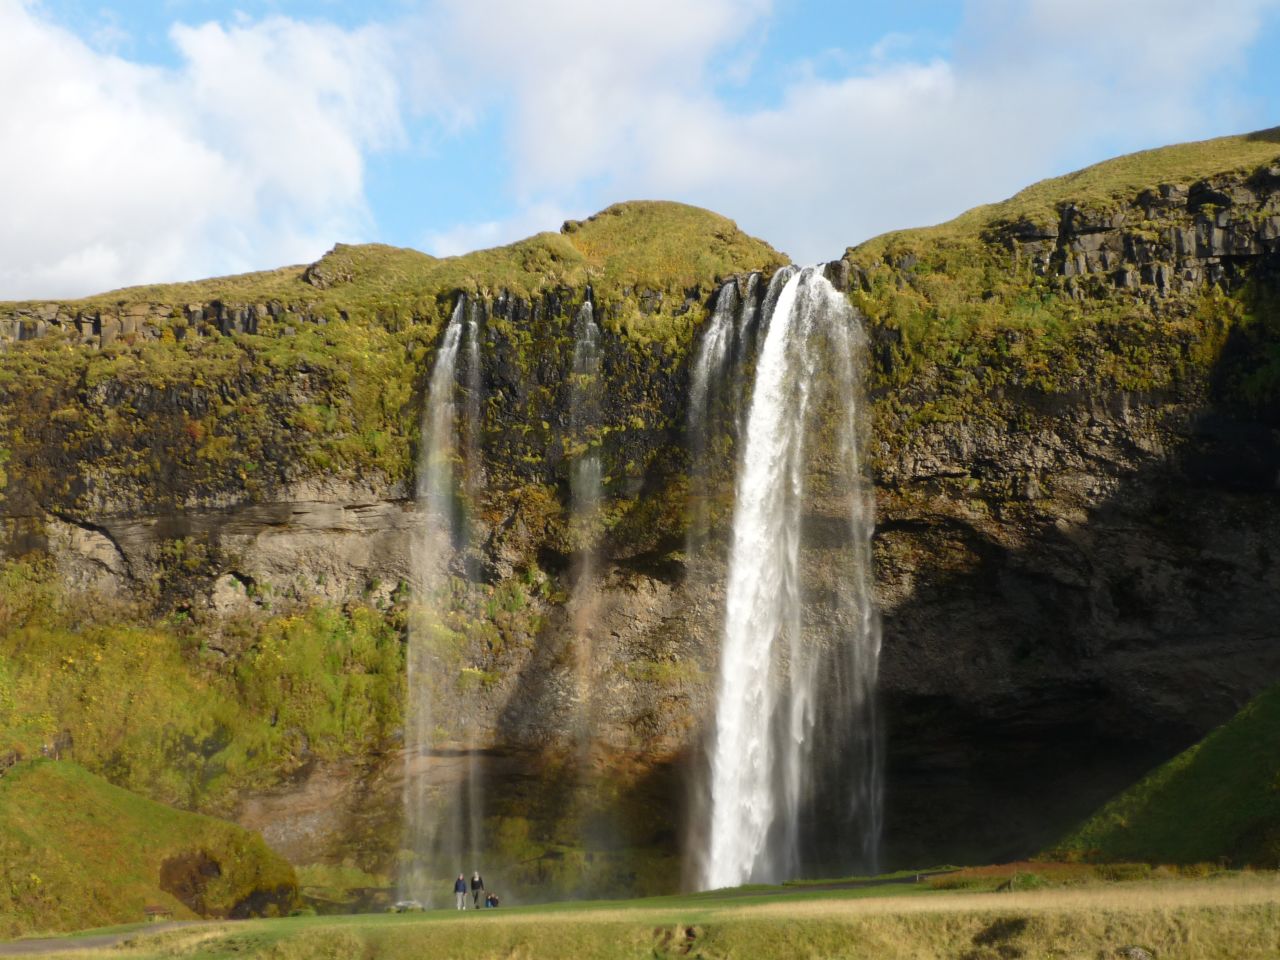 A waterfall you can stand beneath without getting wet.